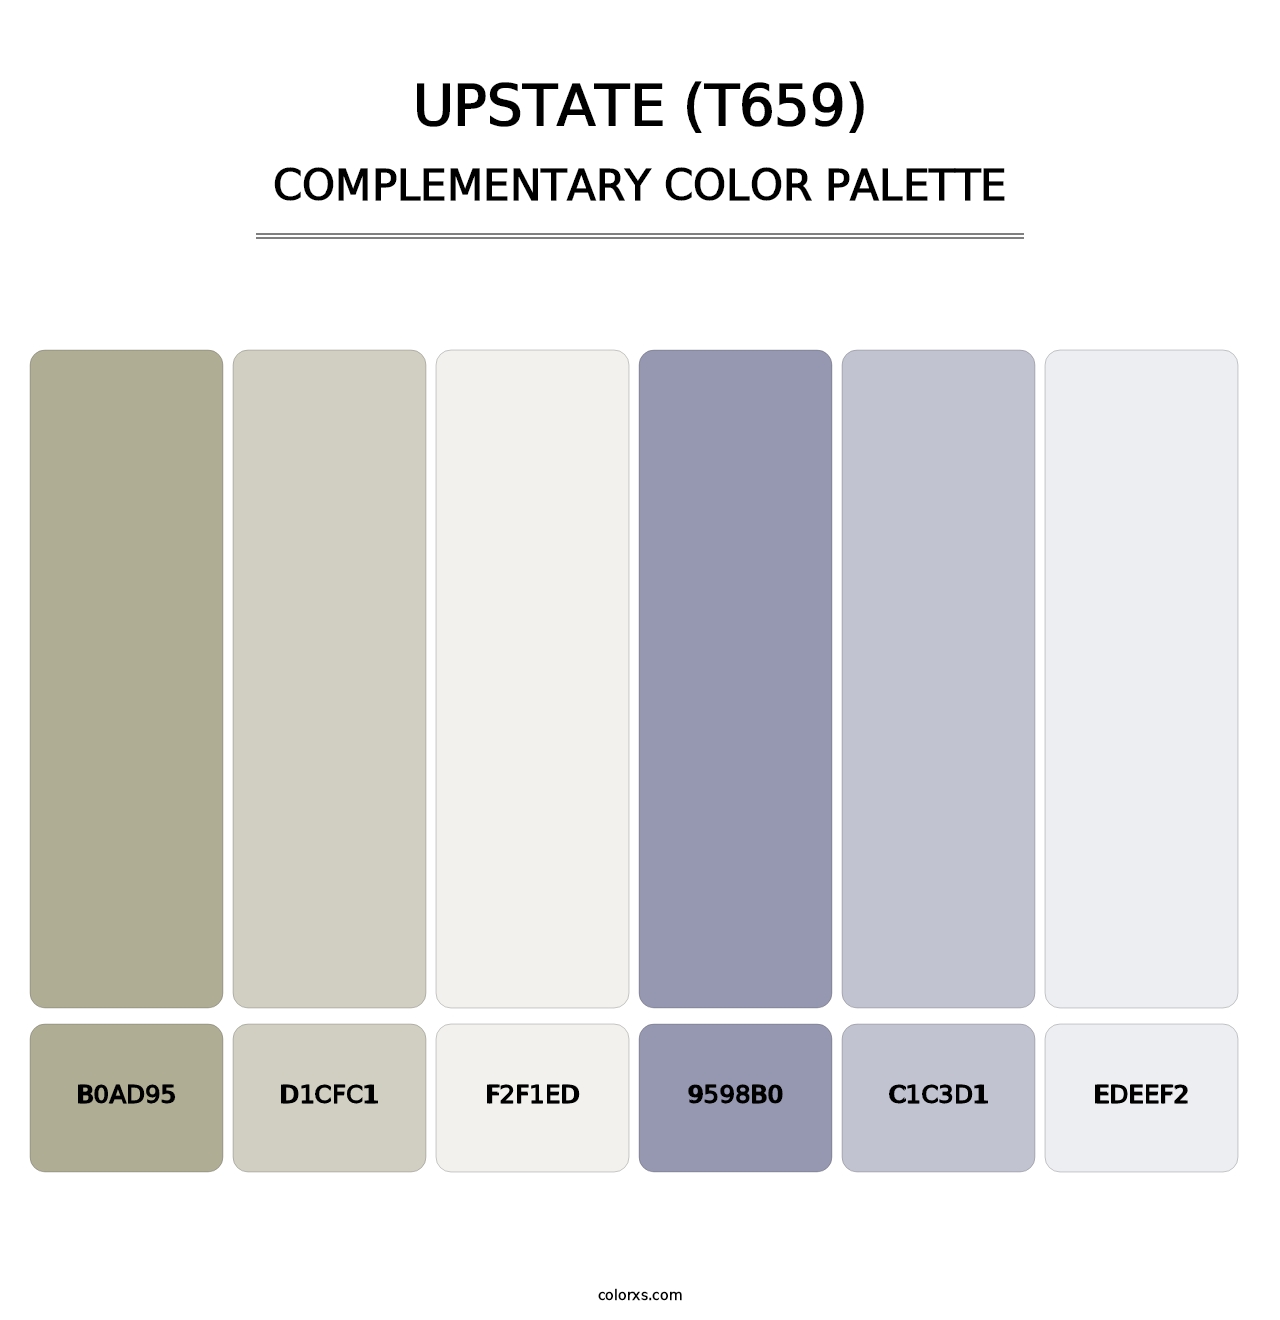 Upstate (T659) - Complementary Color Palette